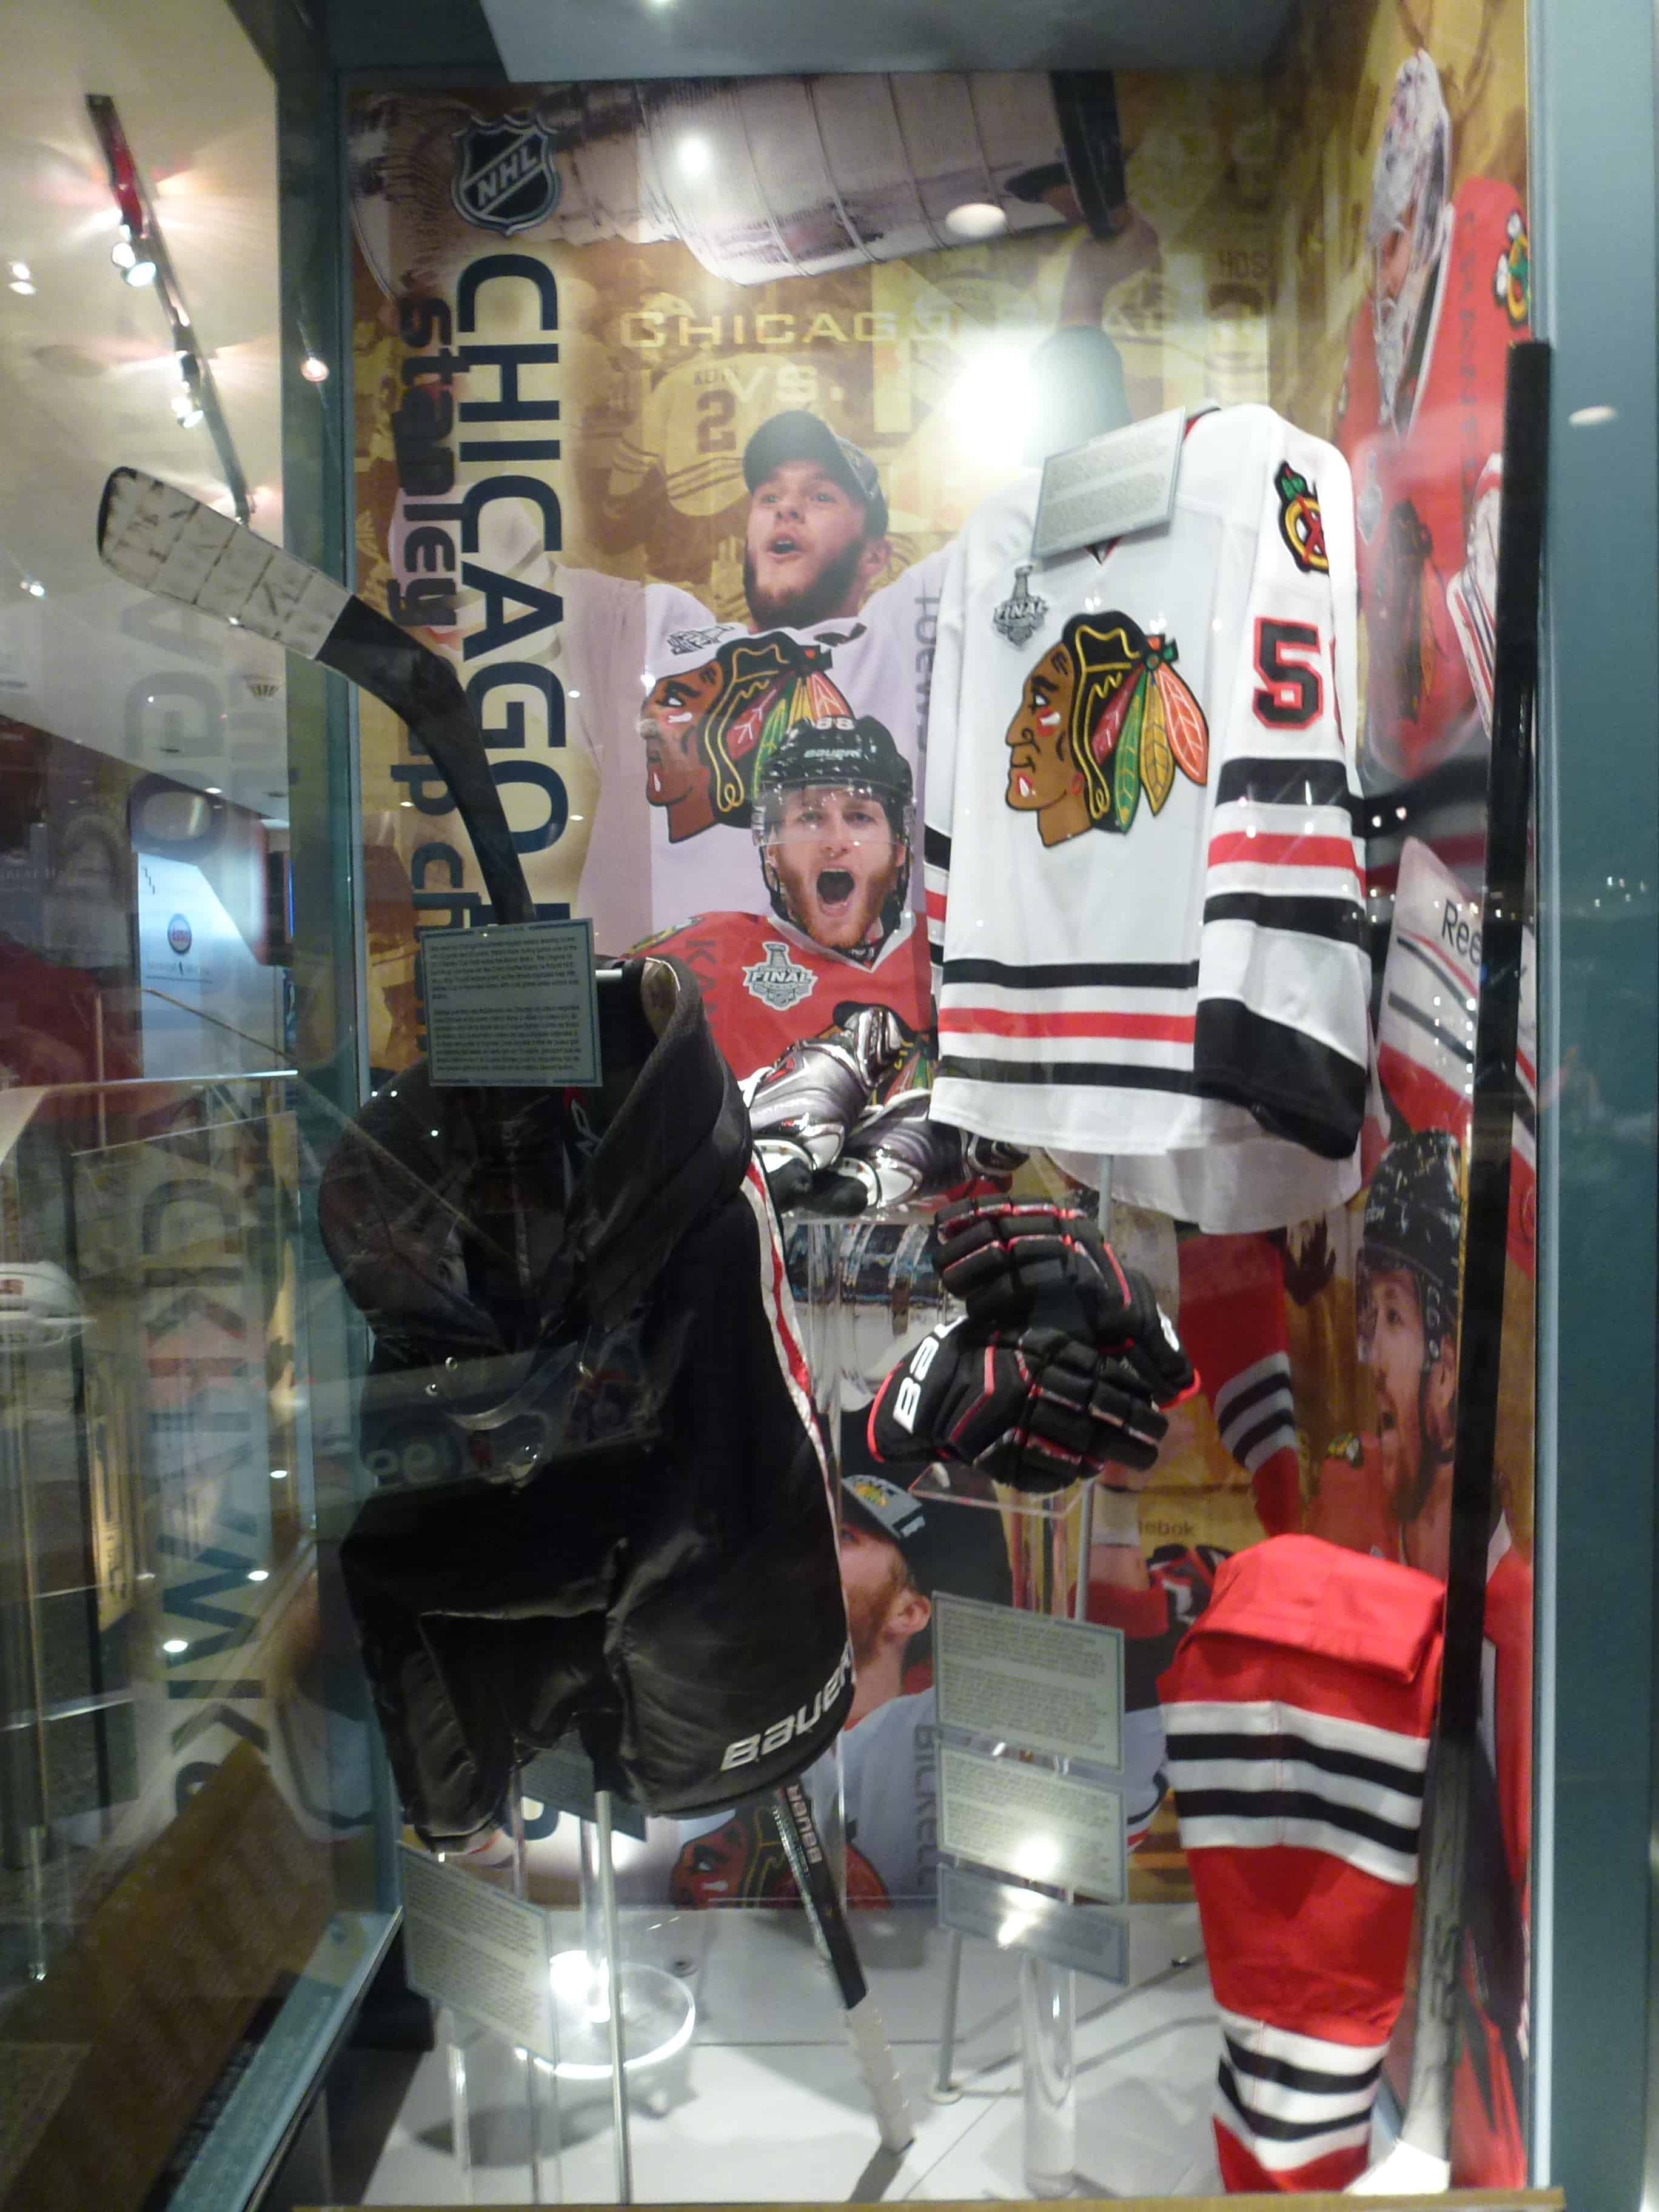 Chicago Blackhawks 2013 Stanley Cup Champions display at the Hockey Hall of Fame in Toronto, Ontario, Canada